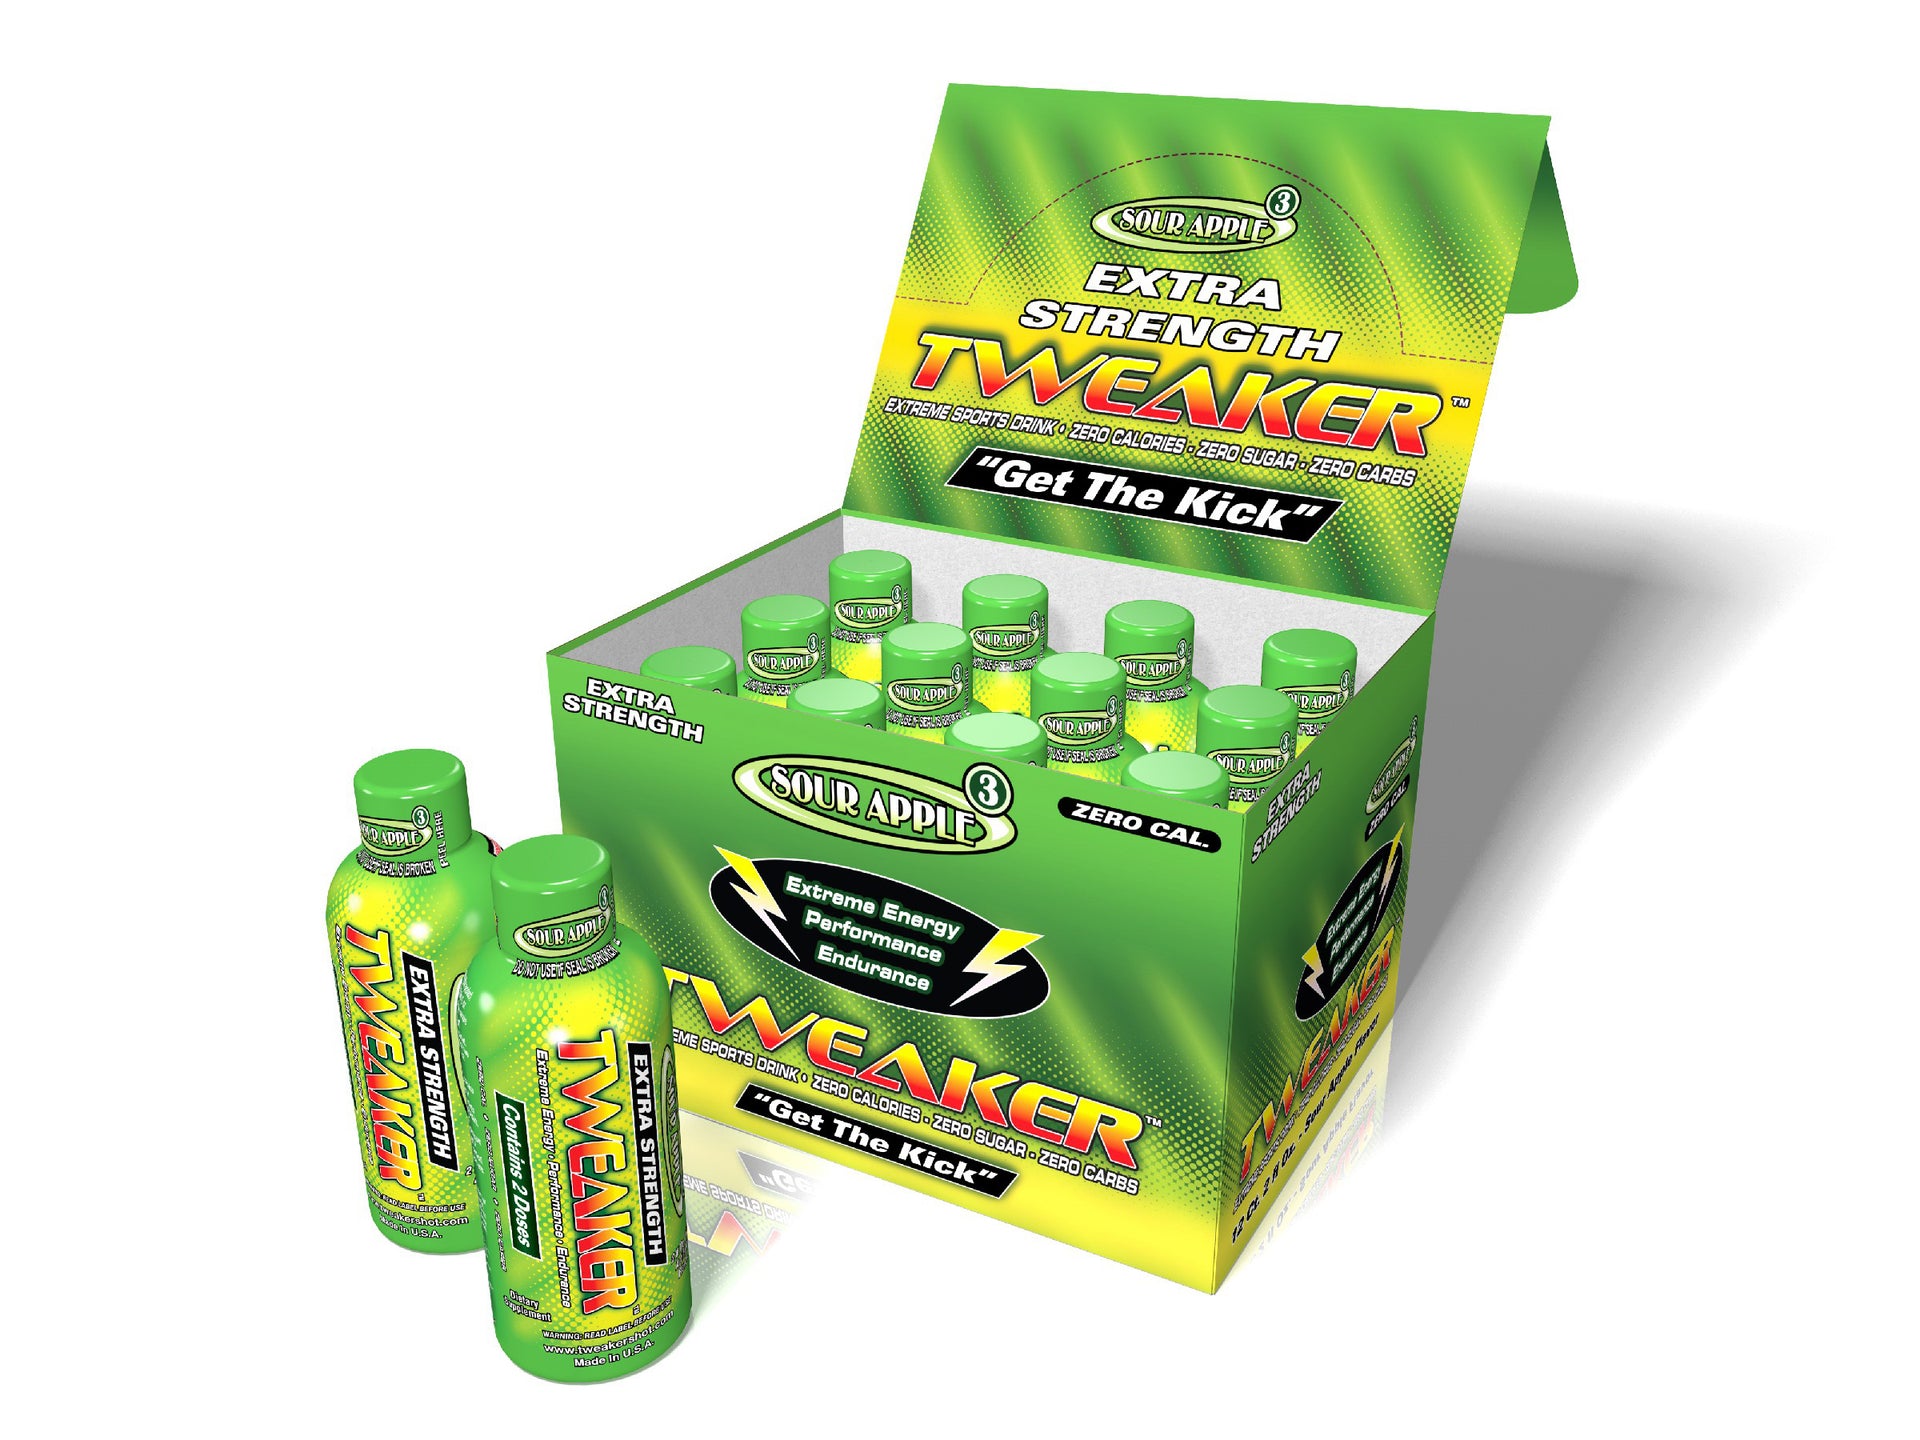 Image shows 12-ct caddy of Extra Strength Tweaker Energy Shot, Sour Apple flavor